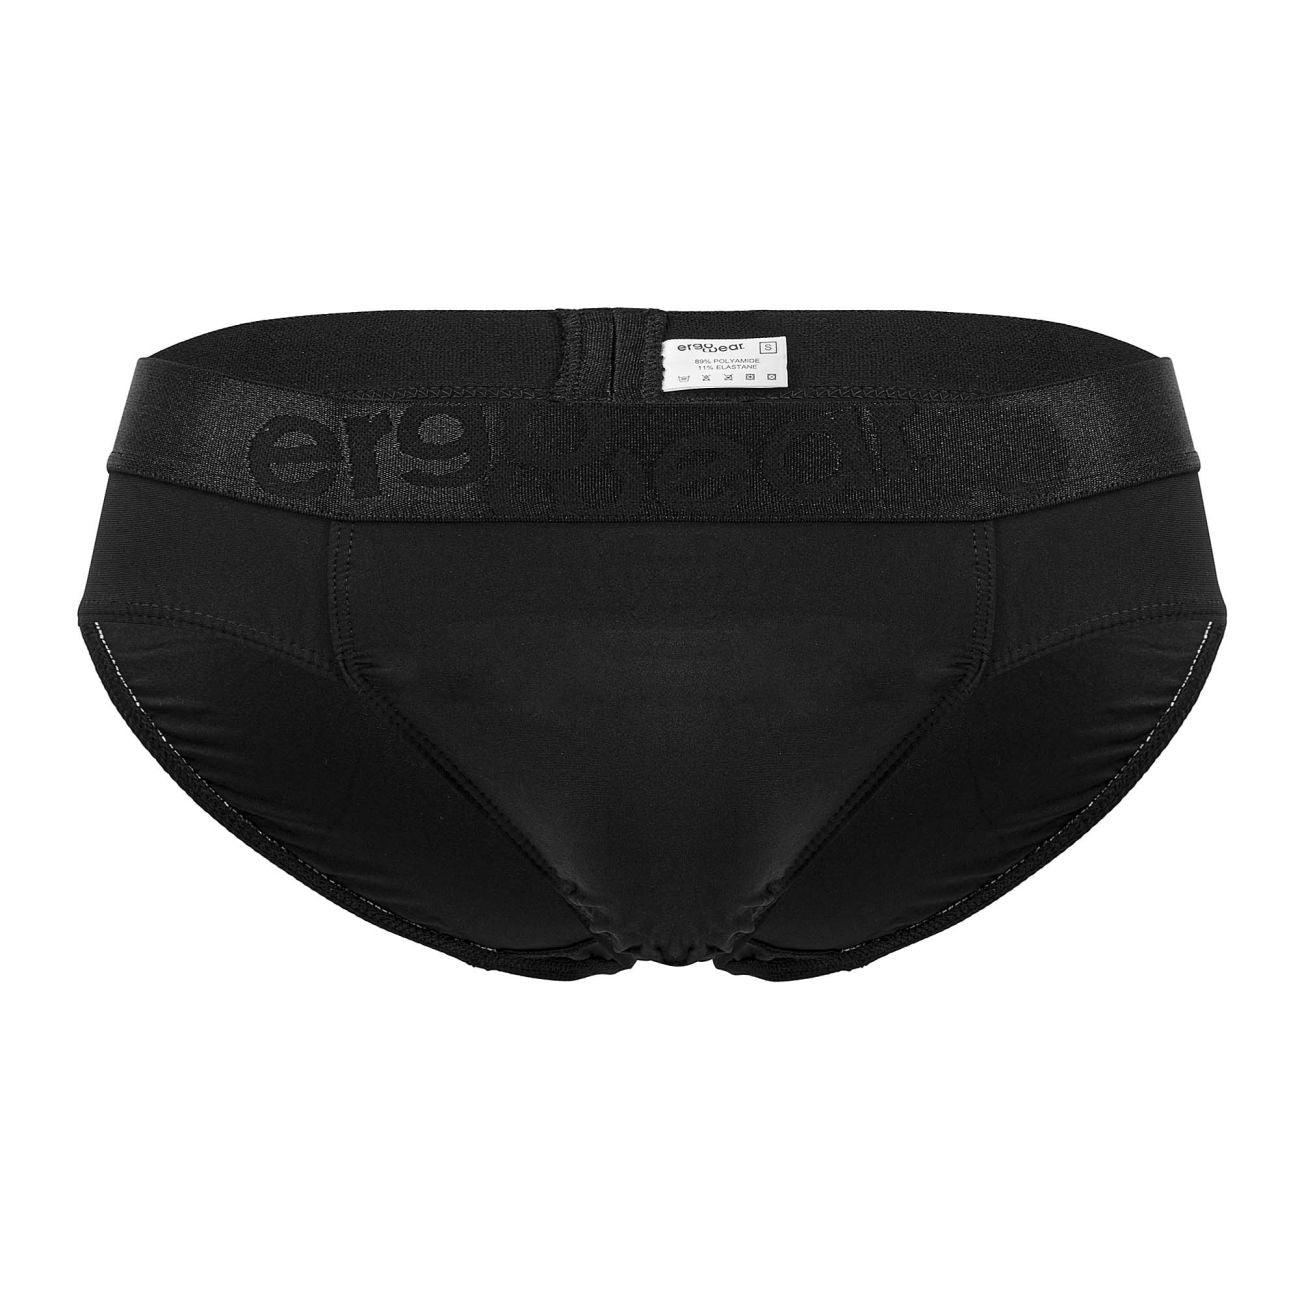 image of product,FEEL XX Briefs - SEXYEONE